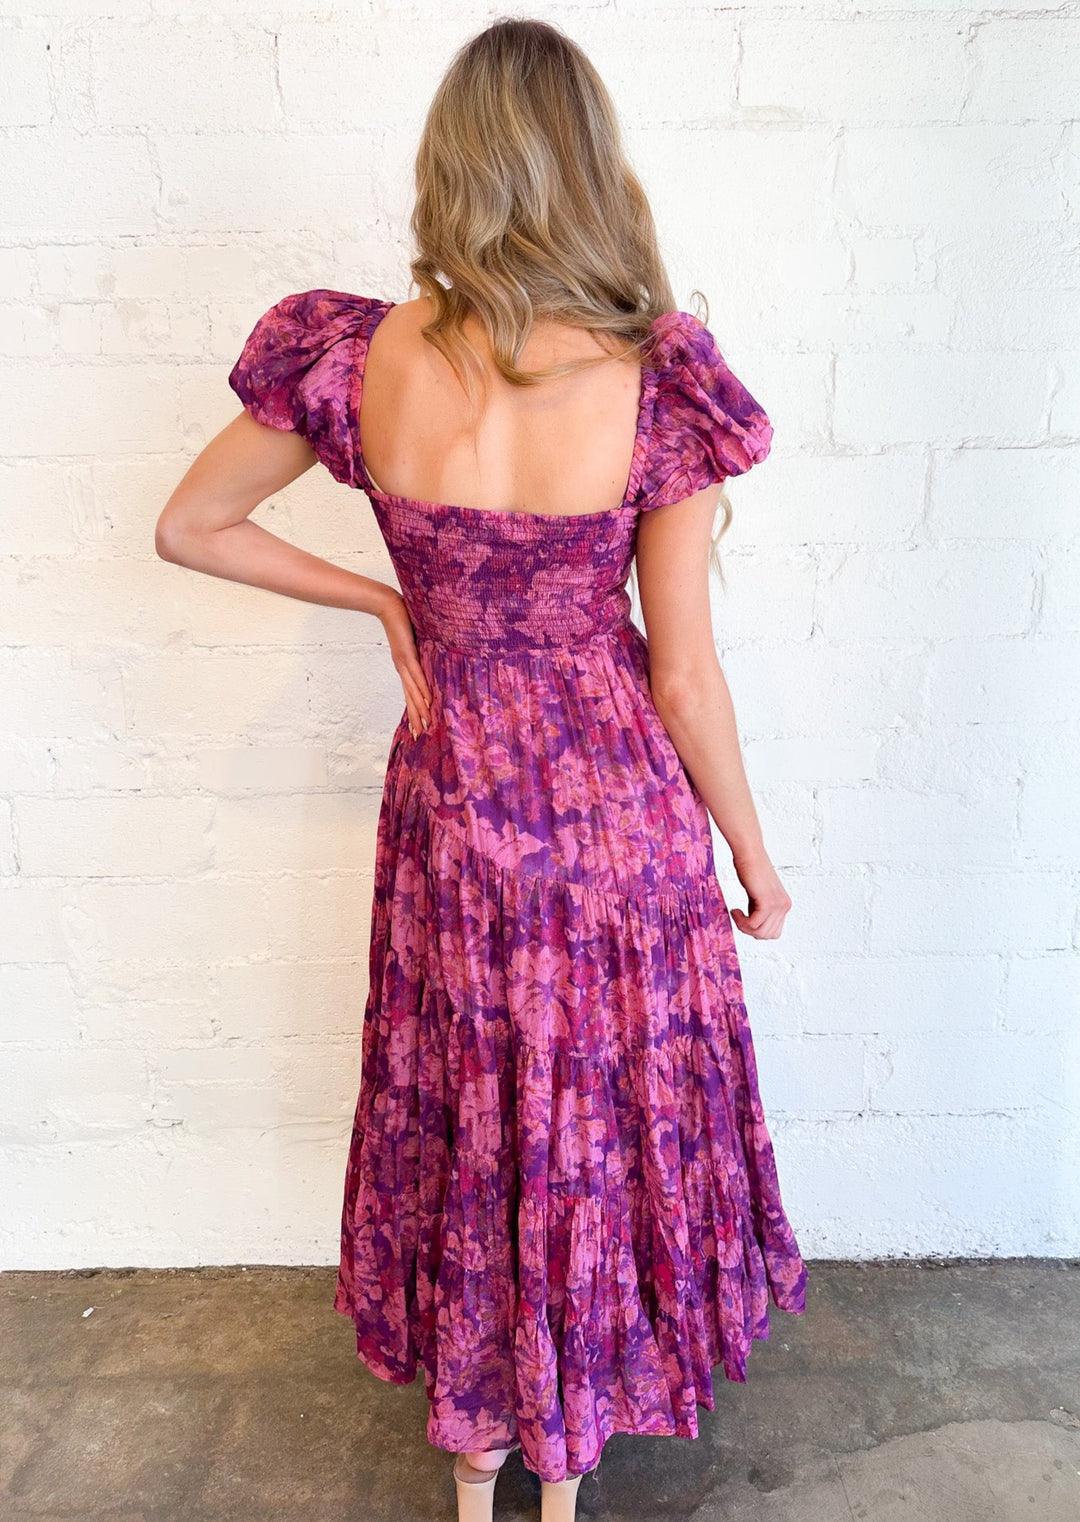 Free People Short Sleeve Sundrenched Maxi Dress, Dresses, Free People, Adeline, dallas boutique, dallas texas, texas boutique, women's boutique dallas, adeline boutique, dallas boutique, trendy boutique, affordable boutique